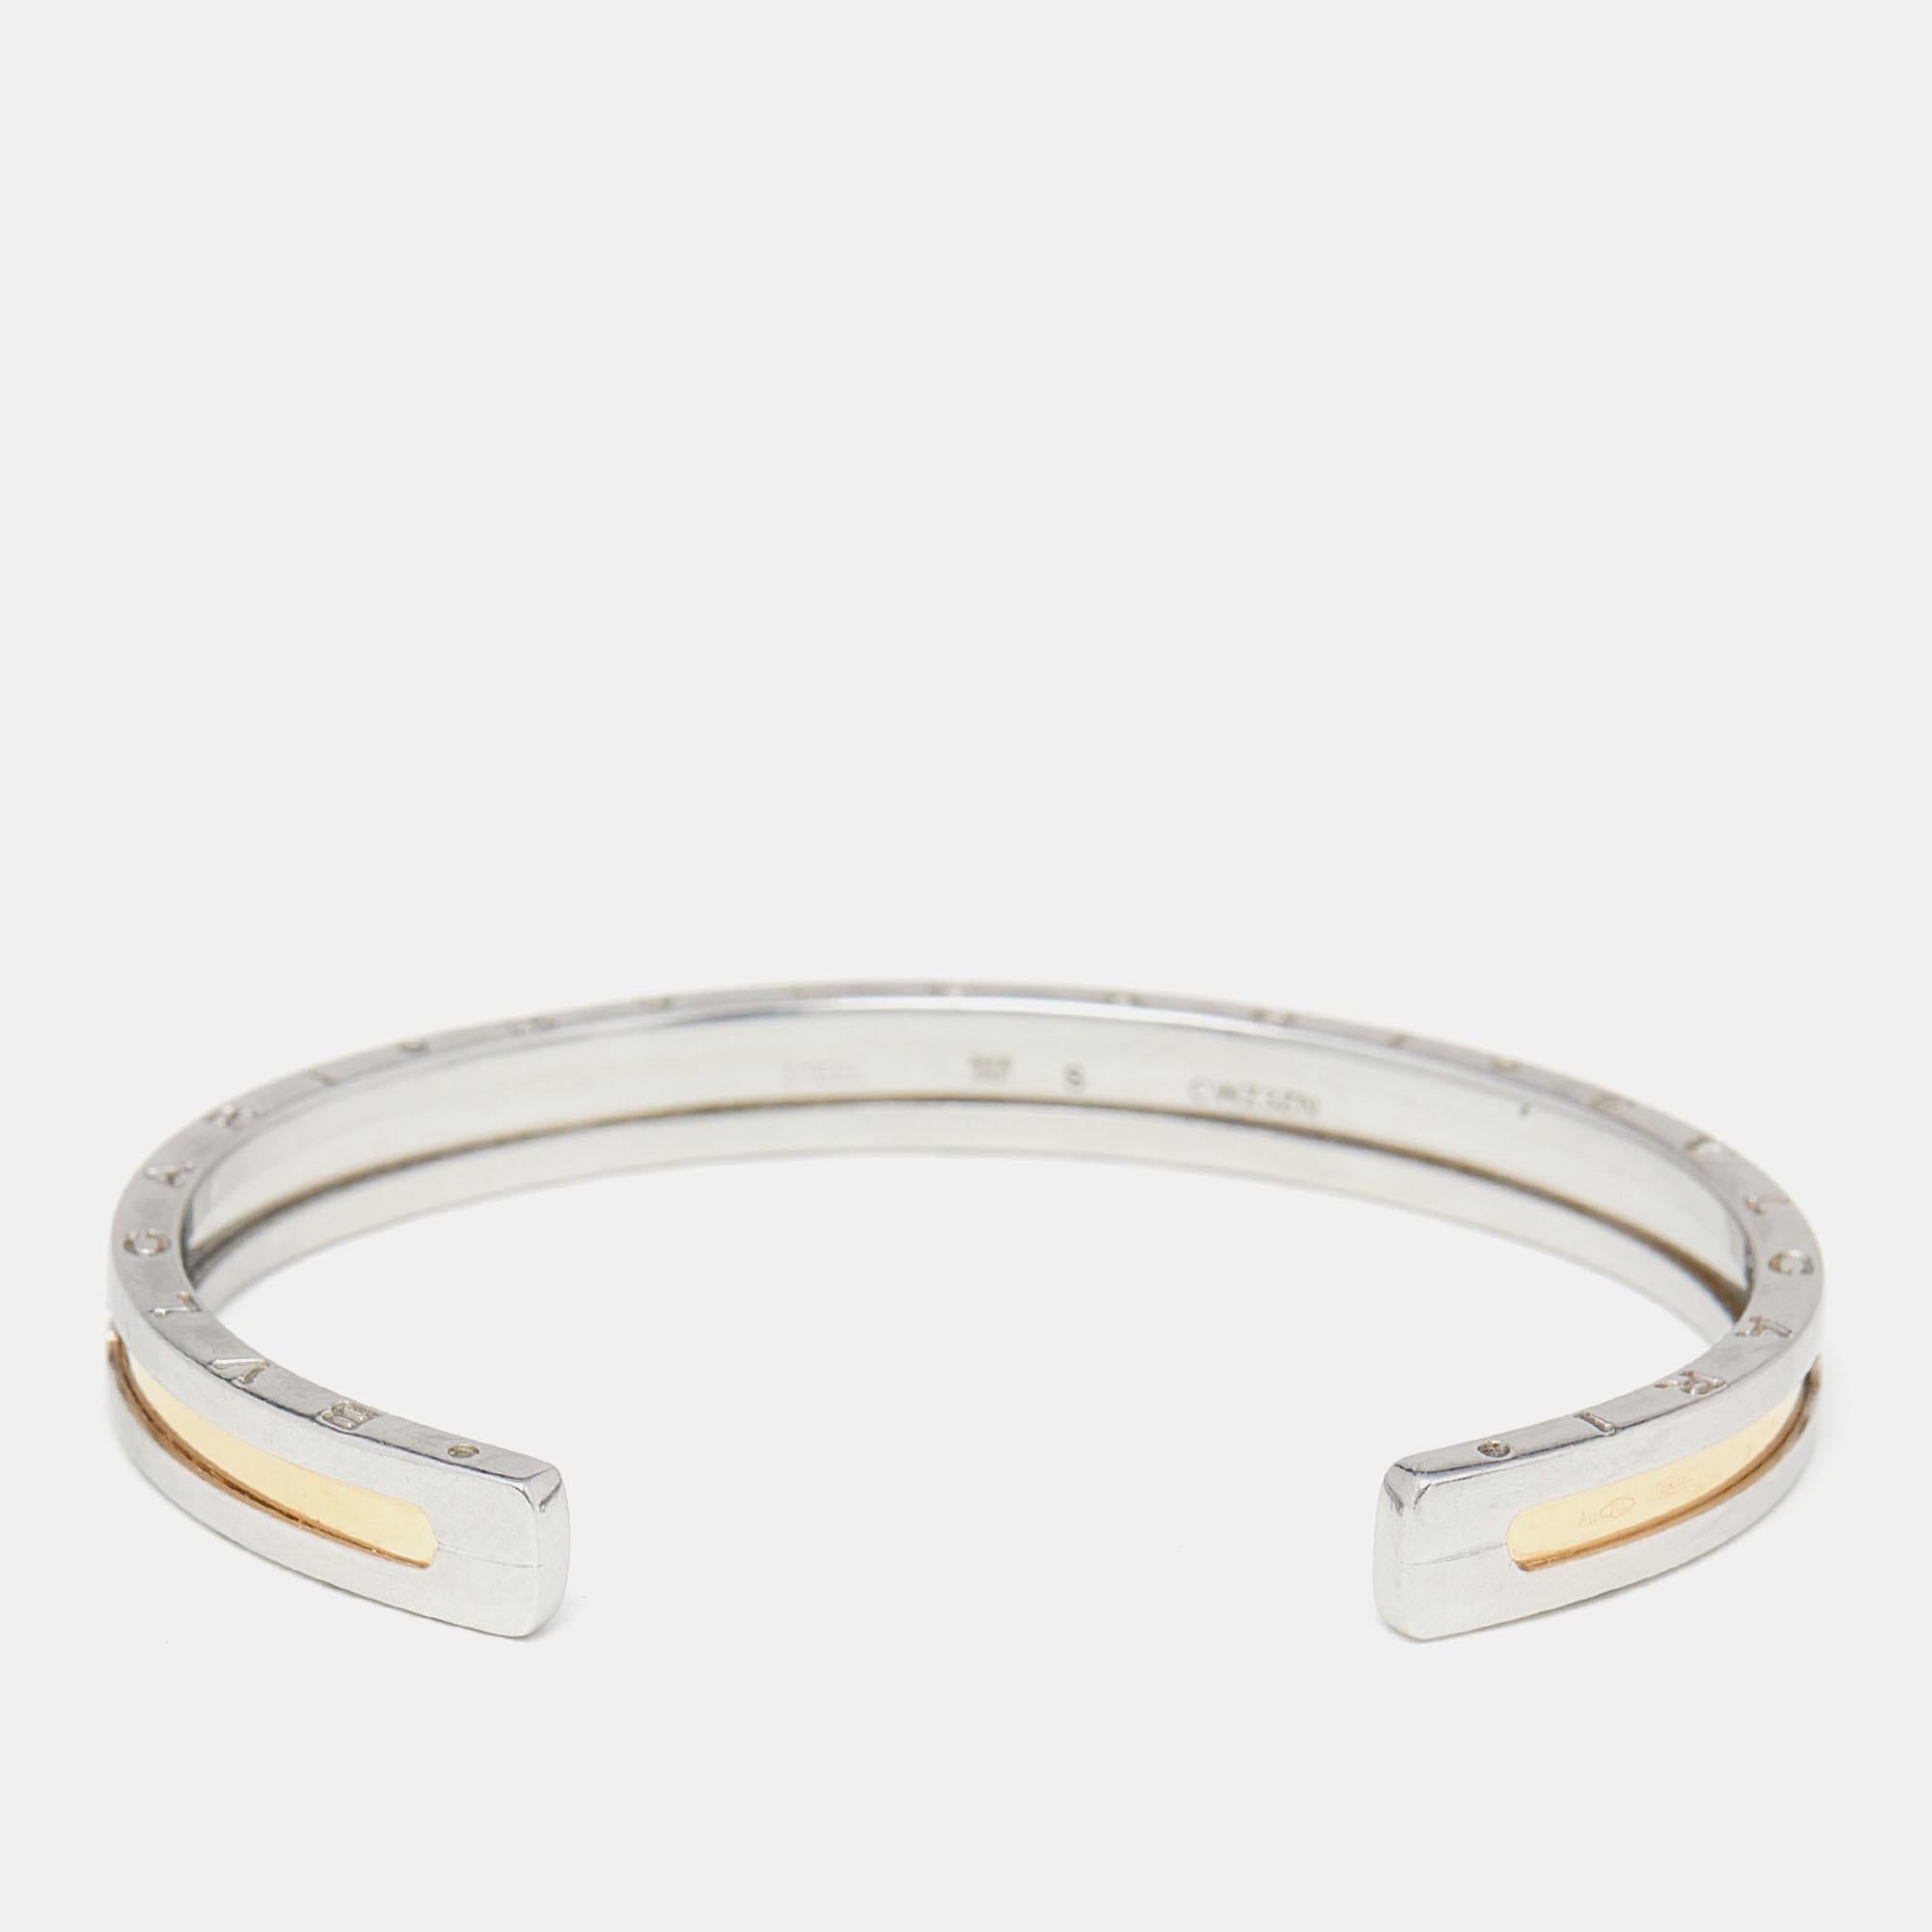 Adorn your wrist with this stunner of a bracelet from Bvlgari. The piece is from their B.Zero1 collection, and it has been crafted from stainless steel and beautifully centered with 18k yellow gold. It is complete with the brand's lettering on the